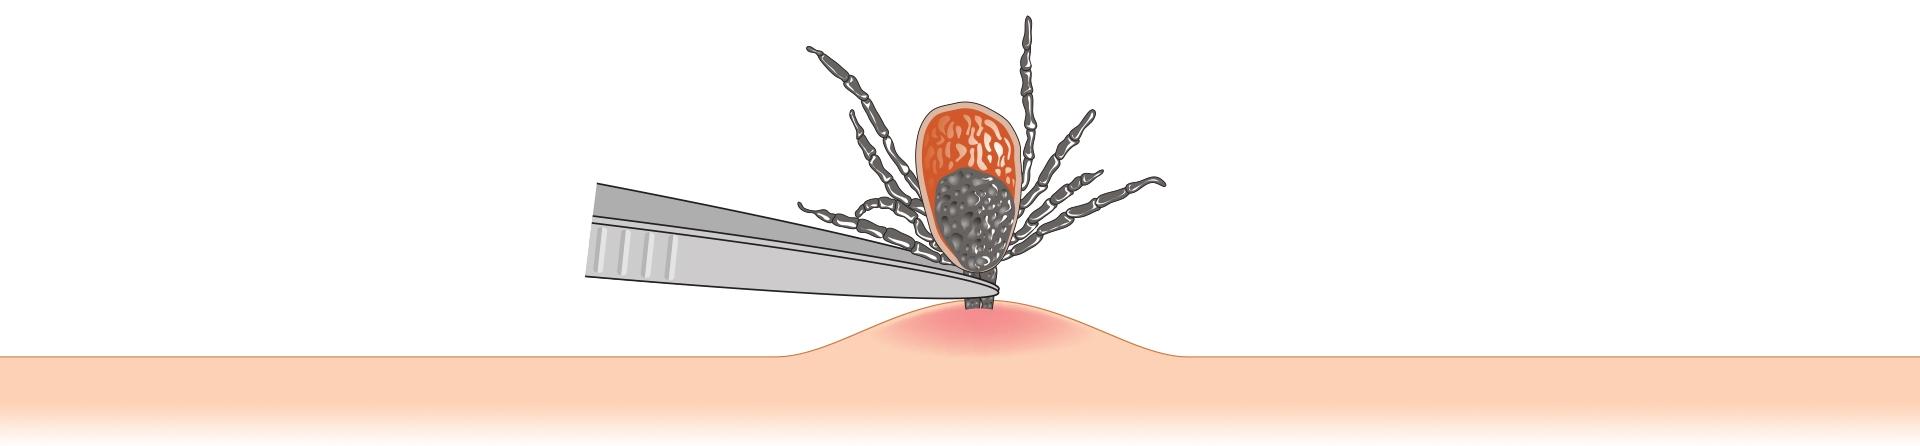 How To Remove Tick